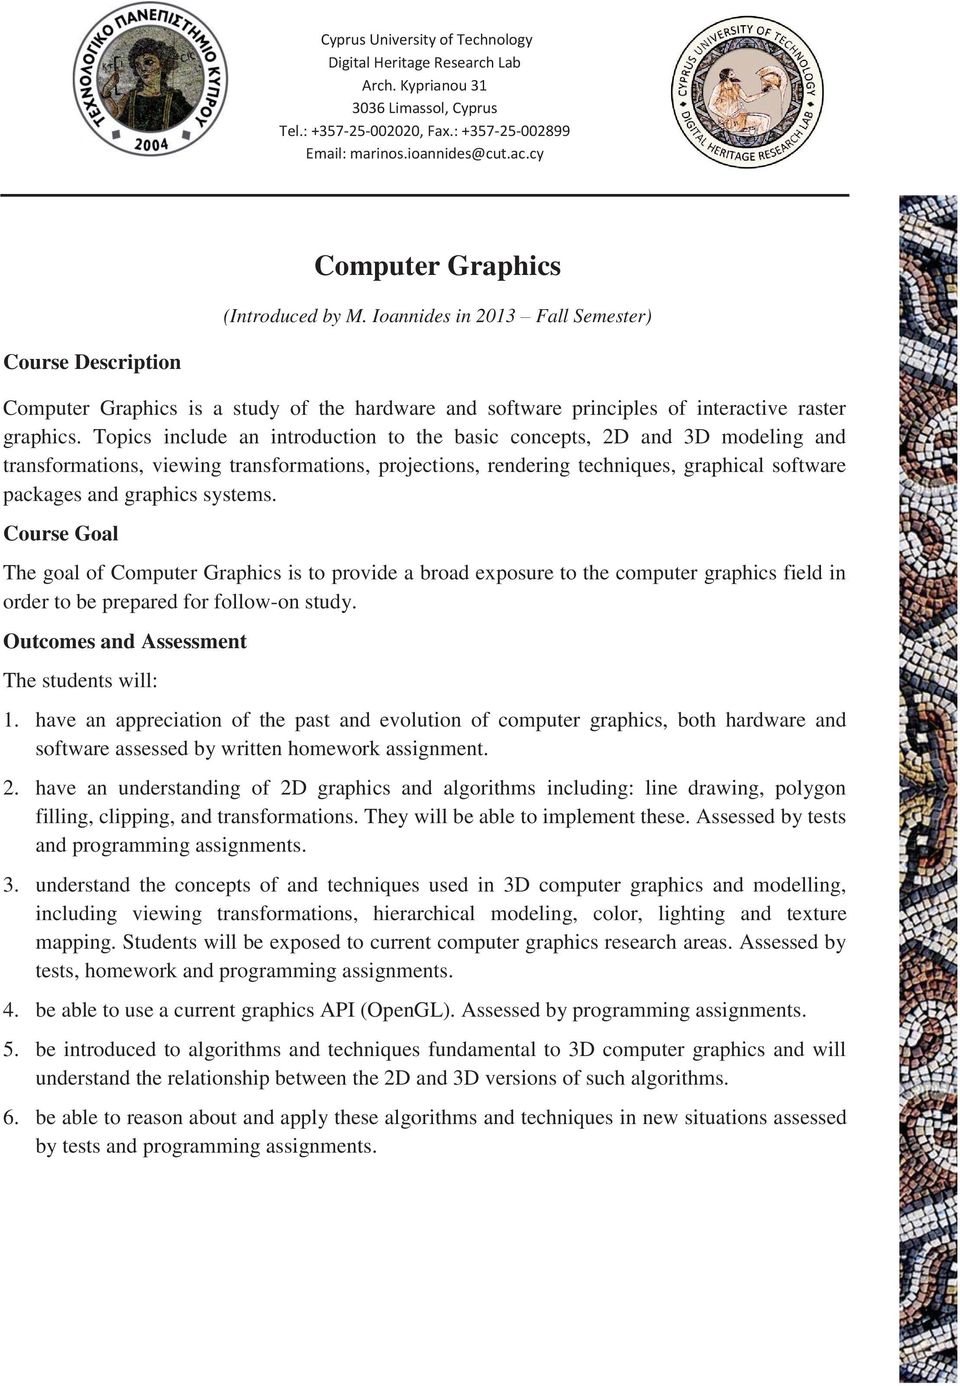 systems. Course Goal The goal of Computer Graphics is to provide a broad exposure to the computer graphics field in order to be prepared for follow-on study.